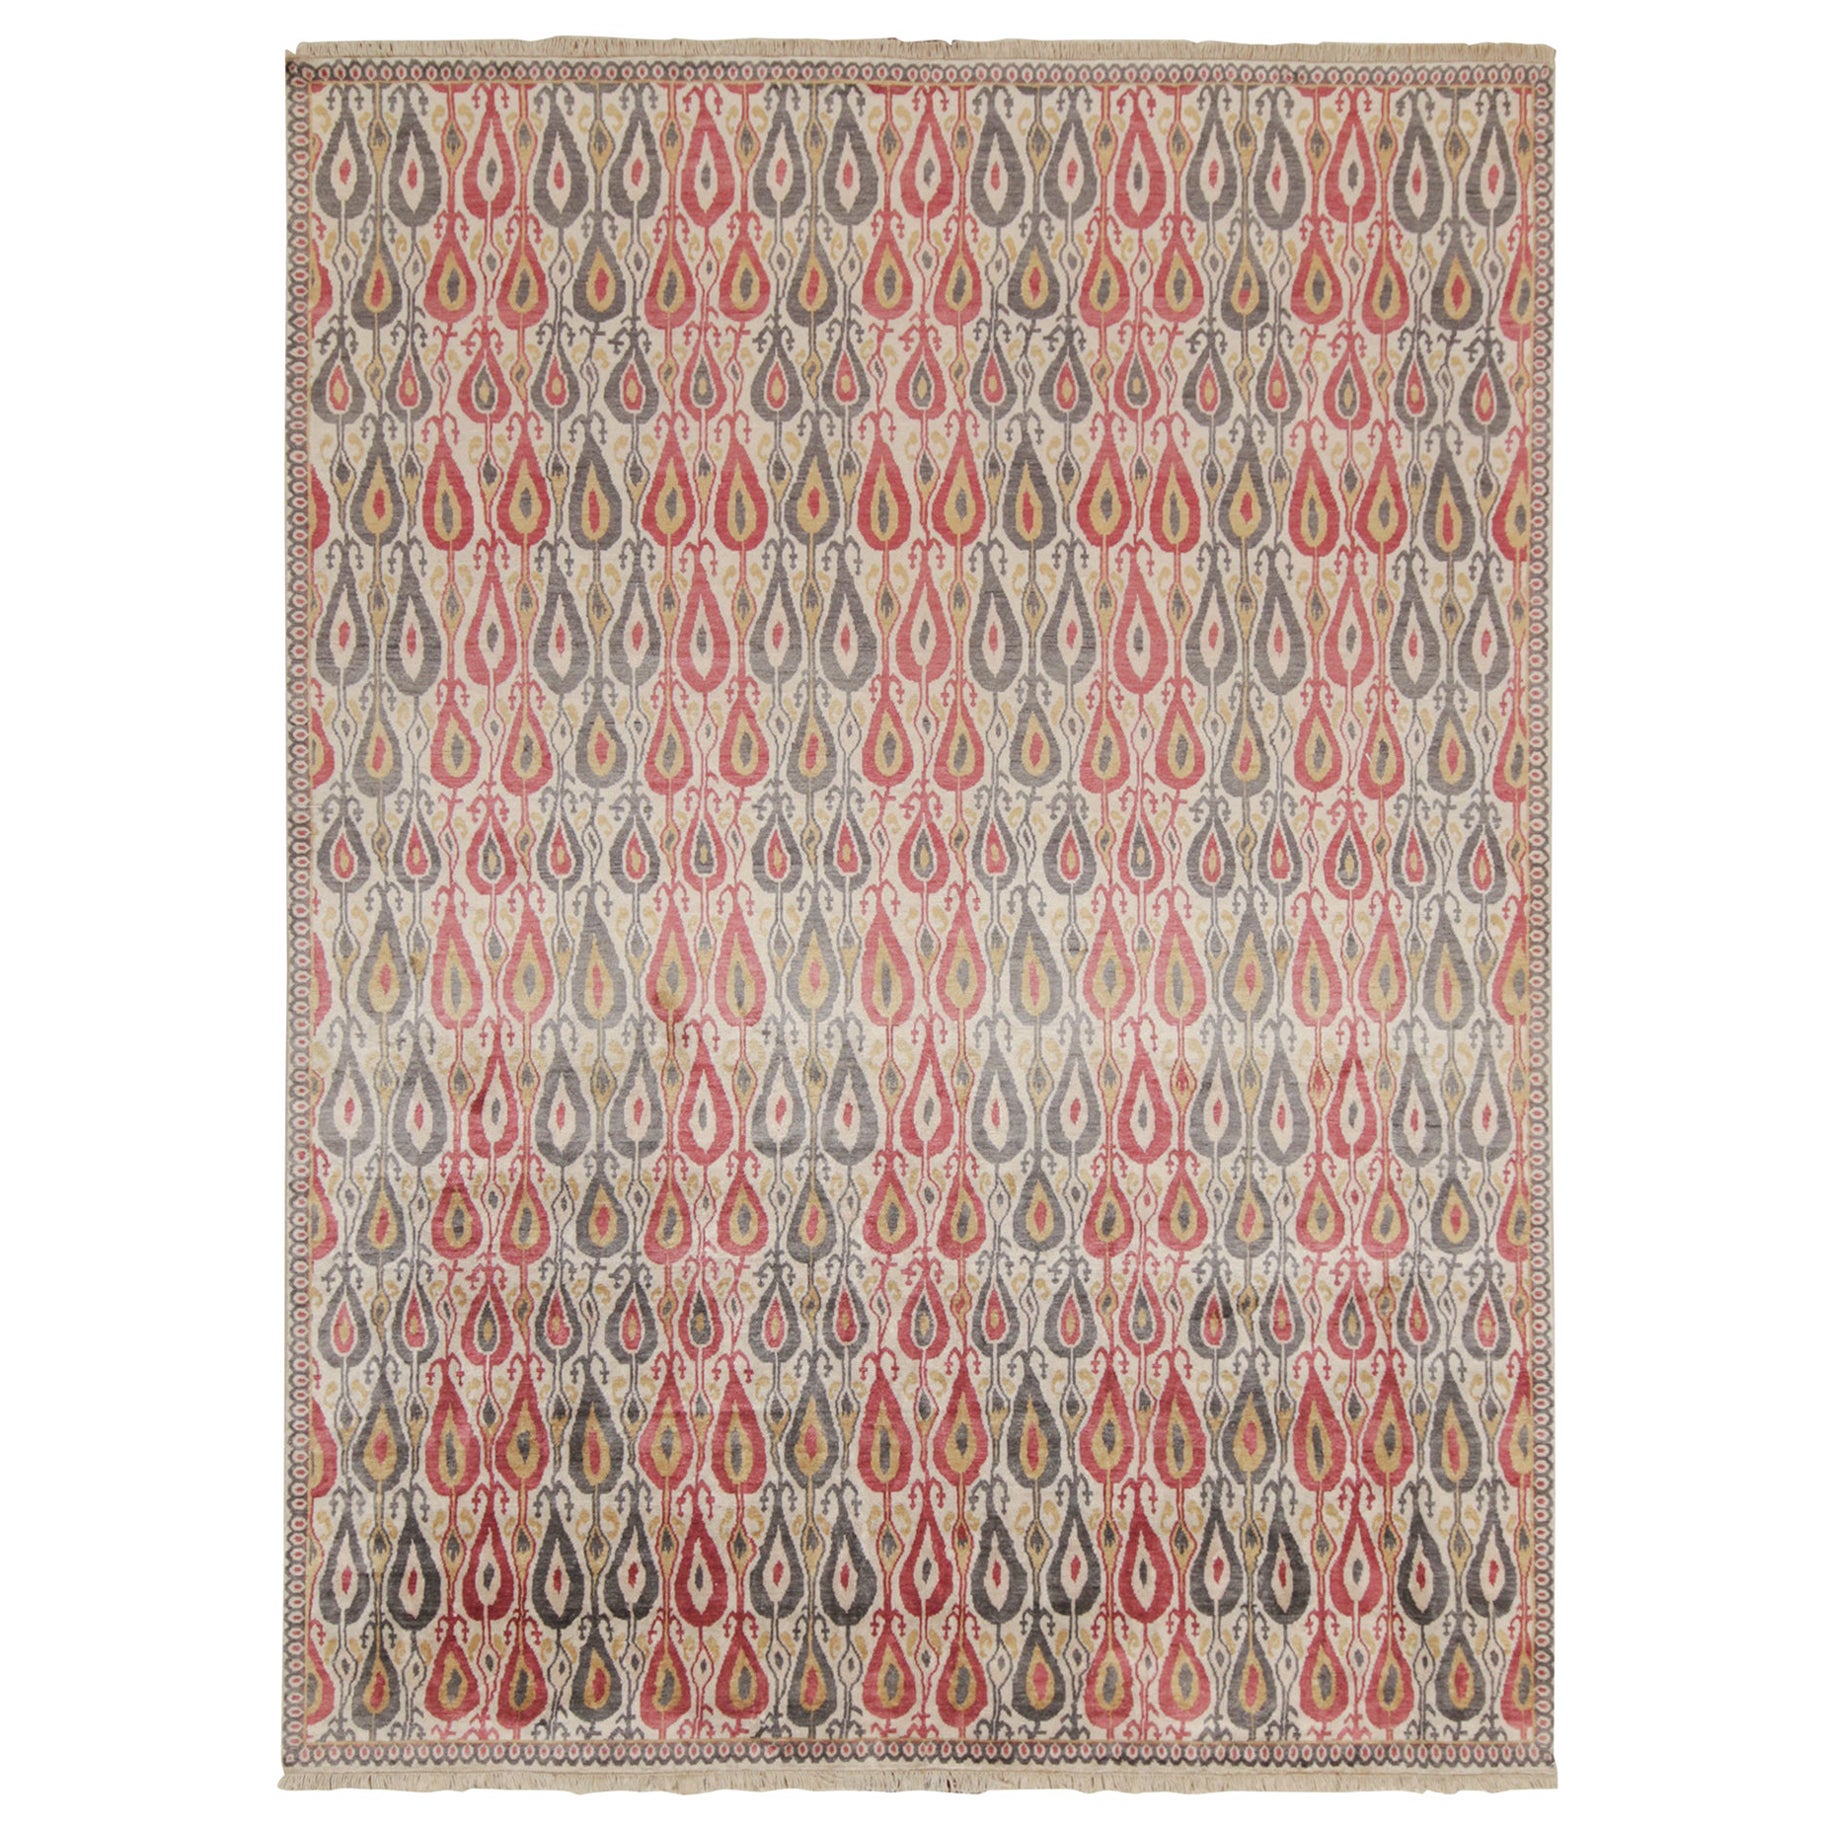 Rug & Kilim’s Classic Ikats Style Rug with Red, Gray and Gold Patterns